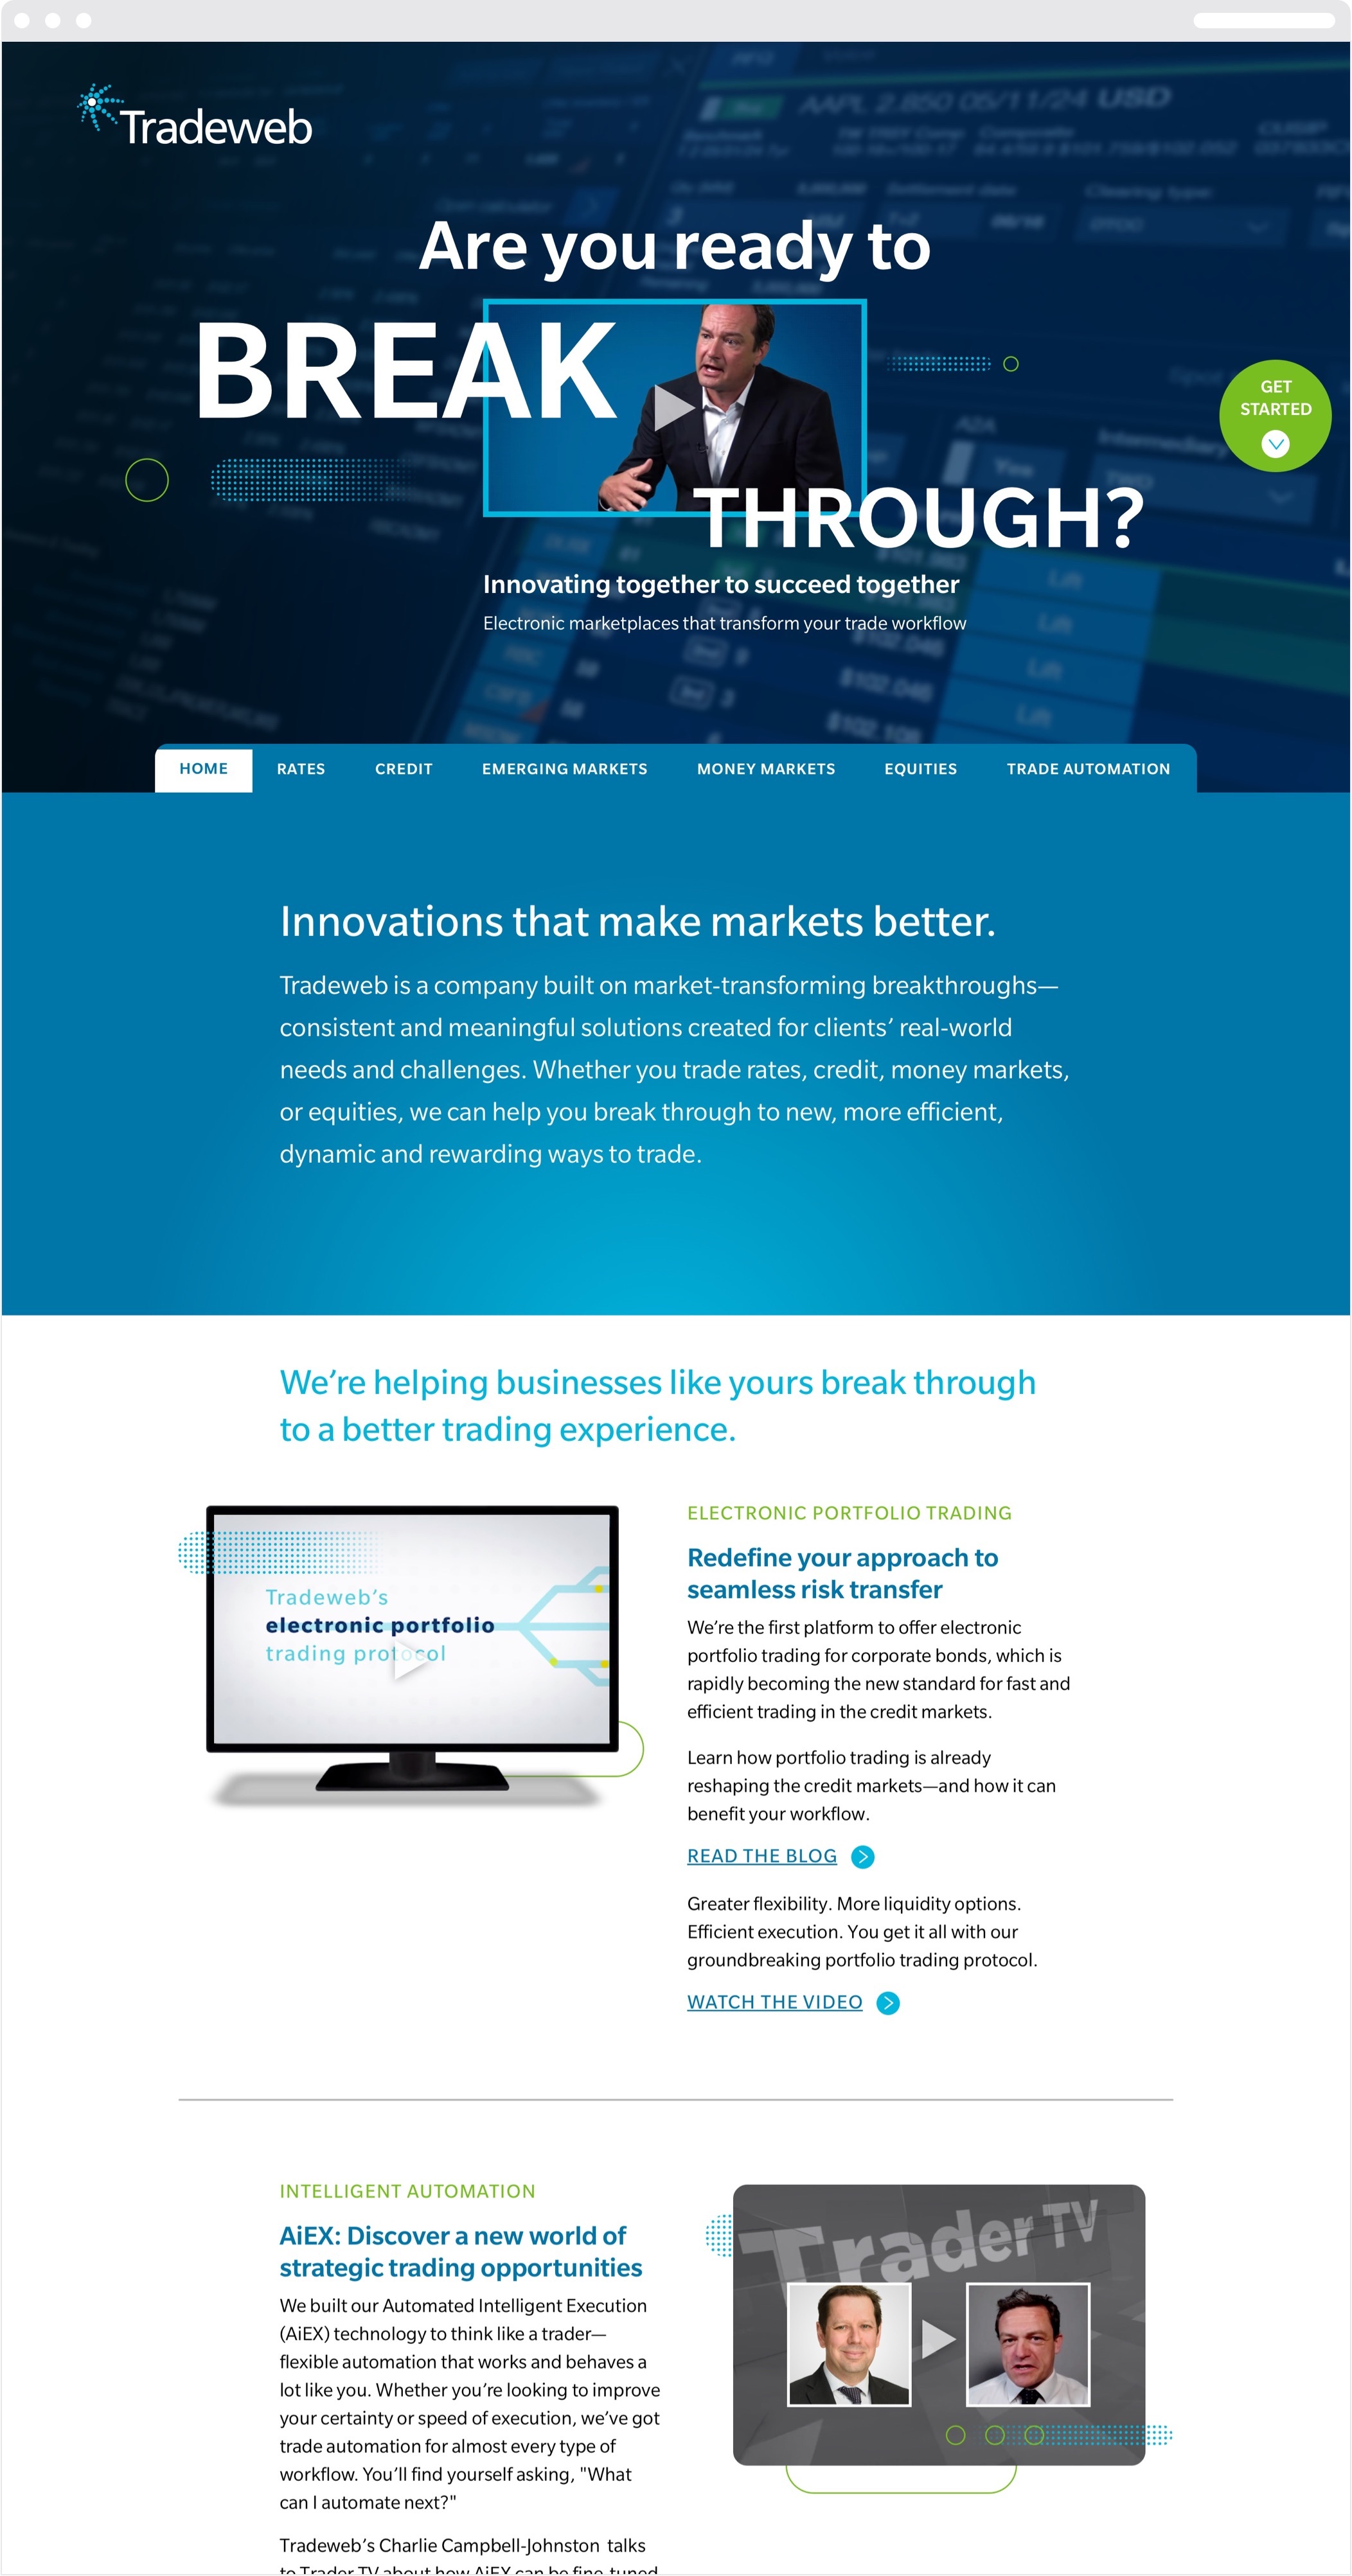 The Tradeweb break through campaign web home page with images and content about its various electronic trading products and solutions. 